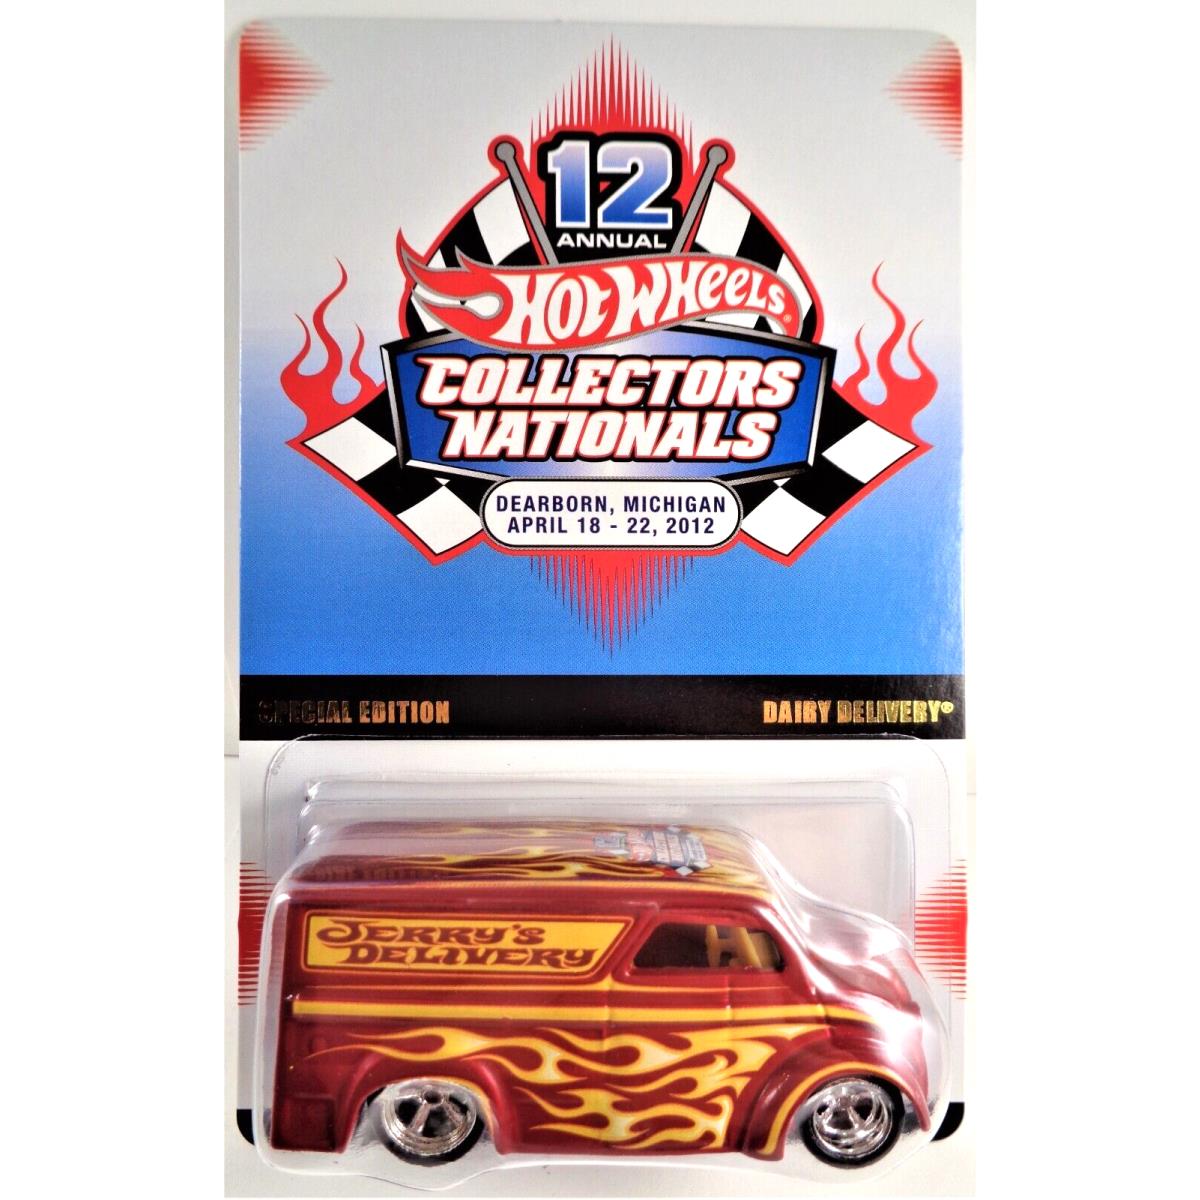 2012 Hot Wheels 12TH Annual Nationals Convention Dinner Car Dairy Delivery